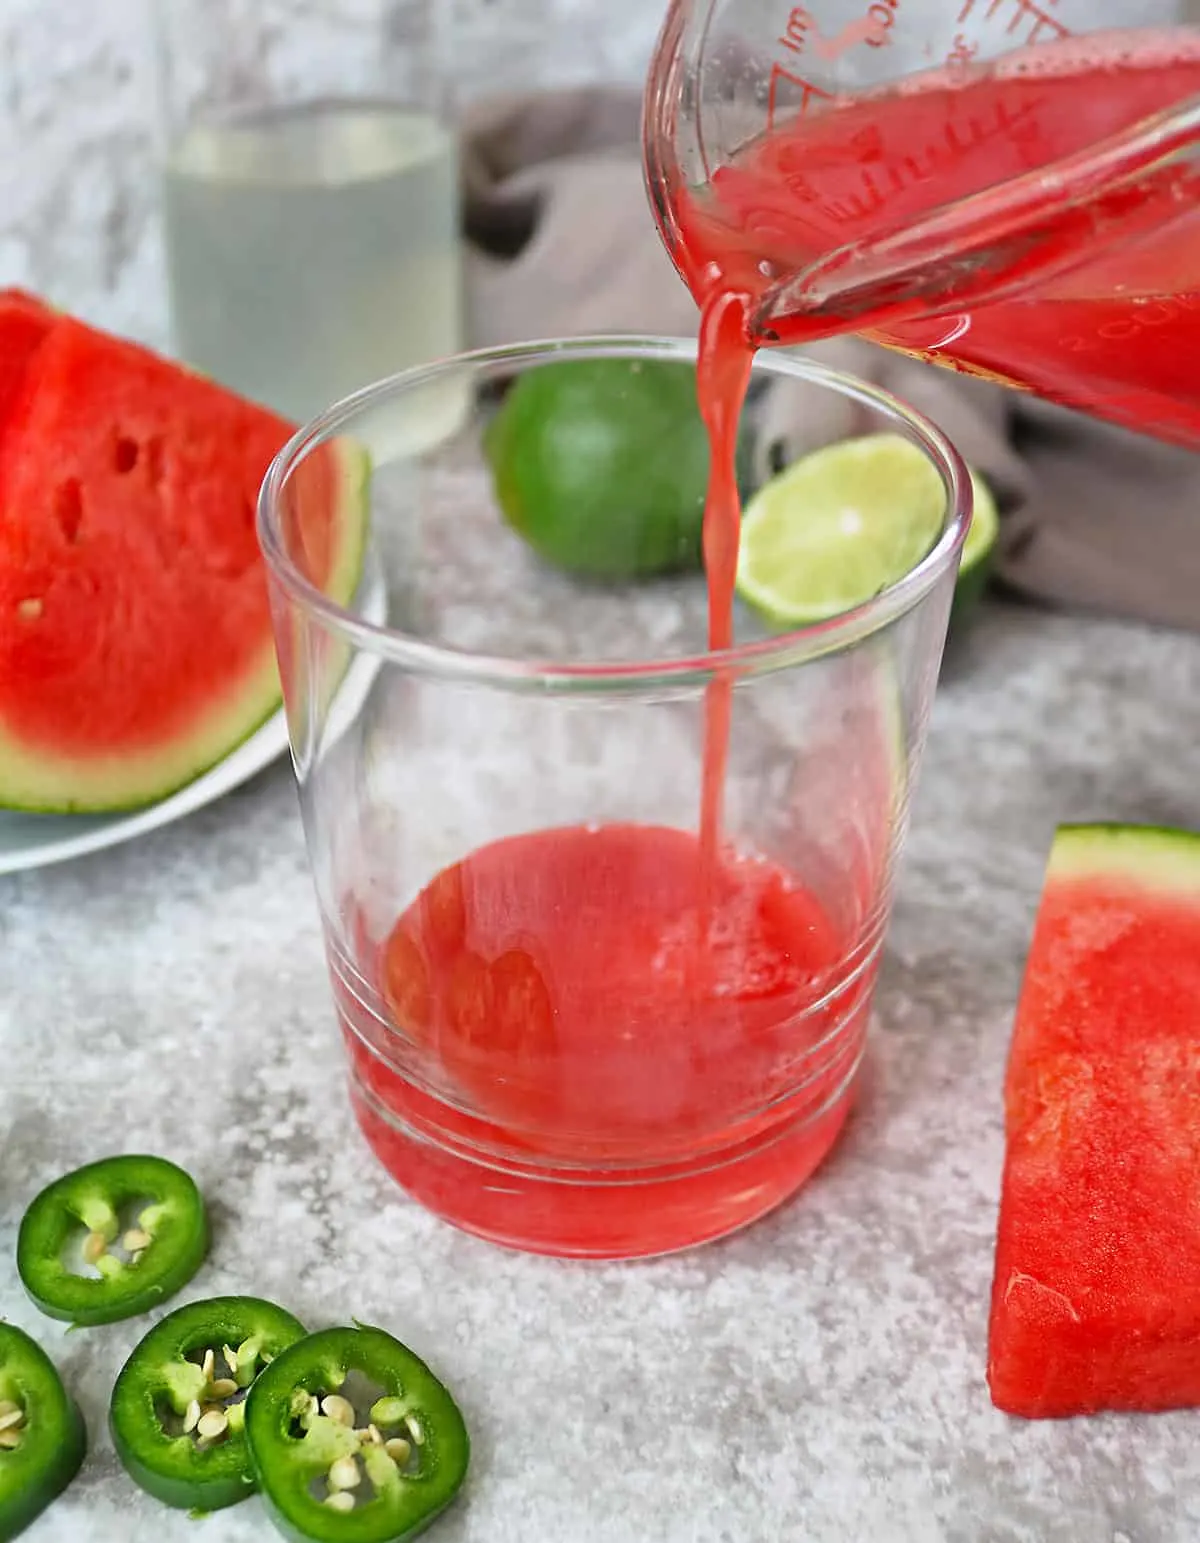 Pouring Delicious watermelon juice into a glass to make the paloma